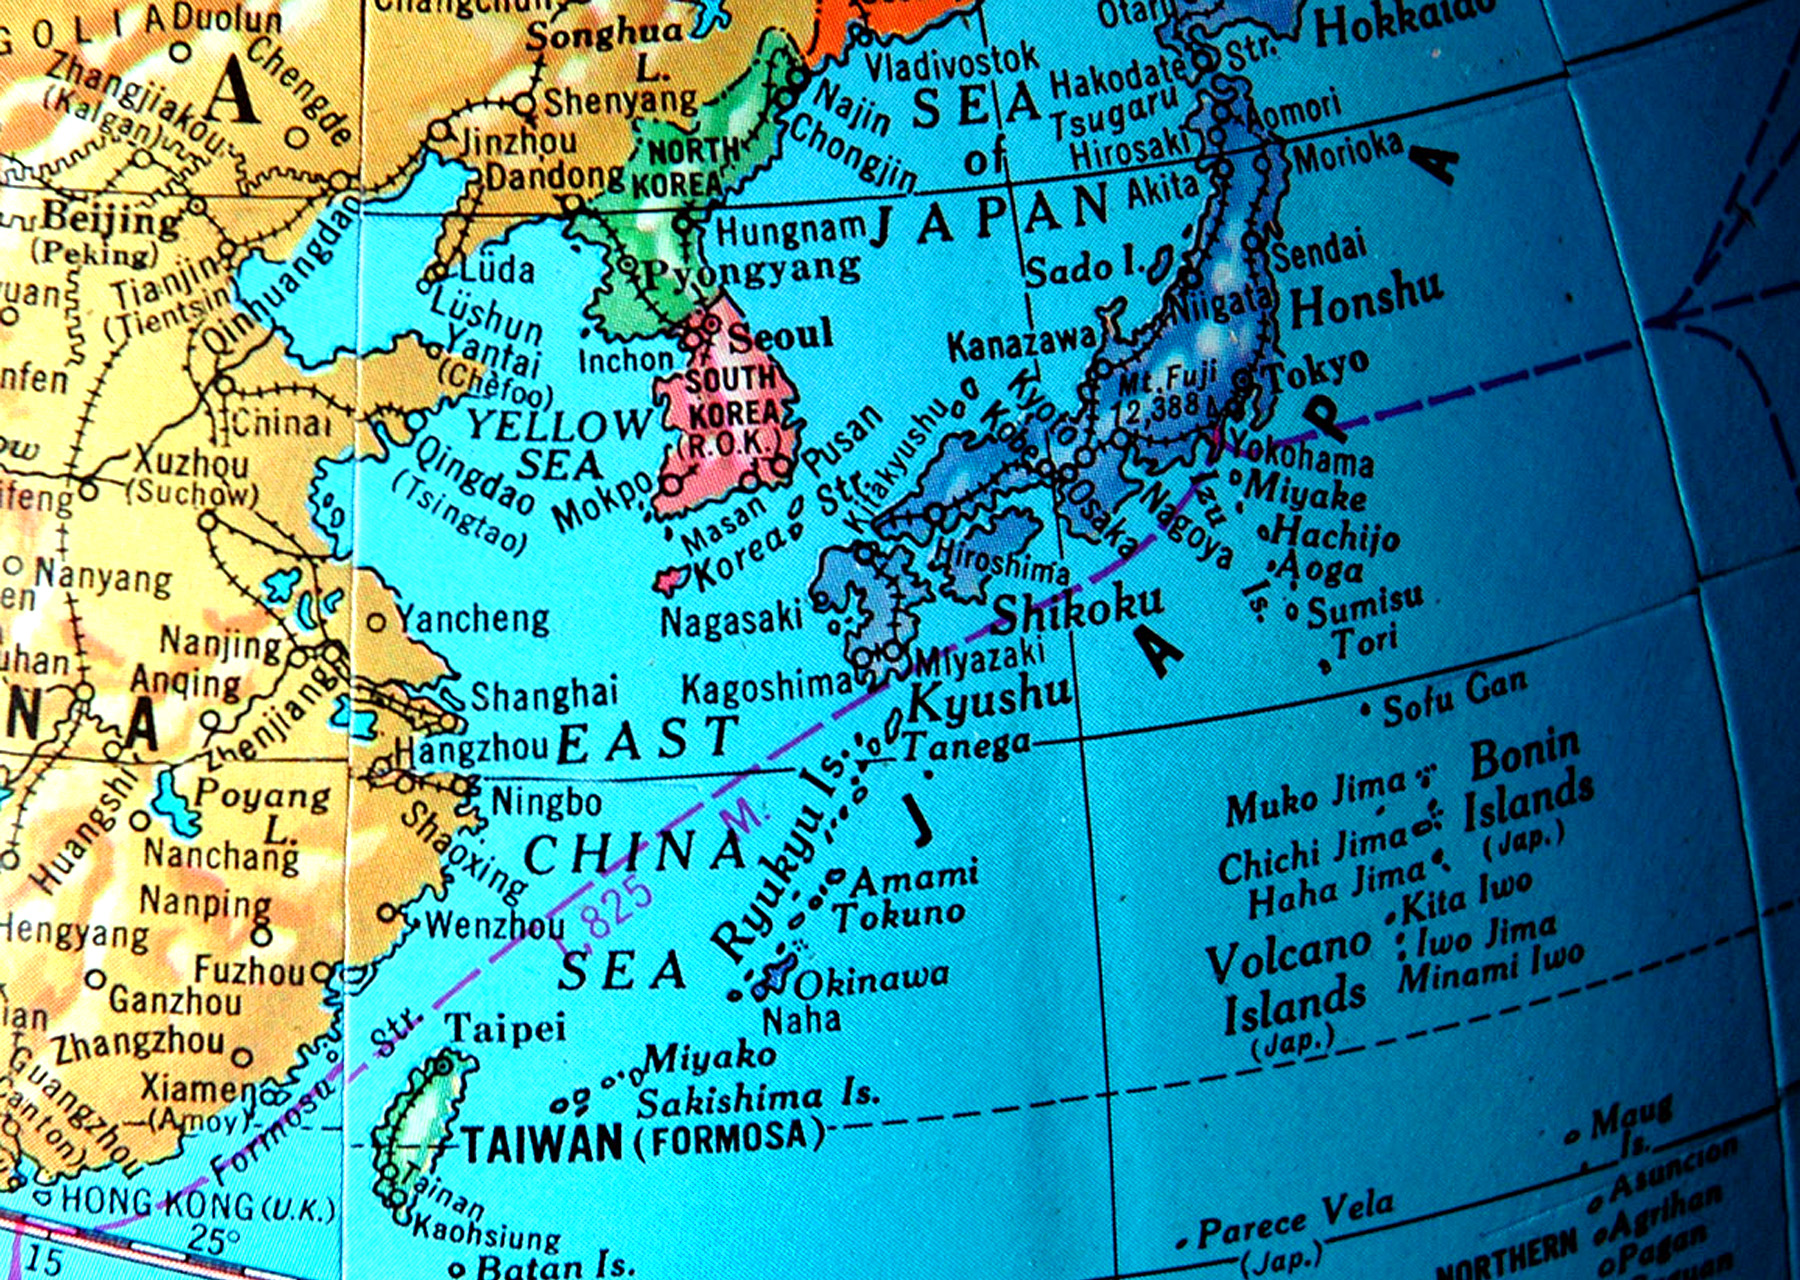 MAP OF THE EAST CHINA SEA AREA